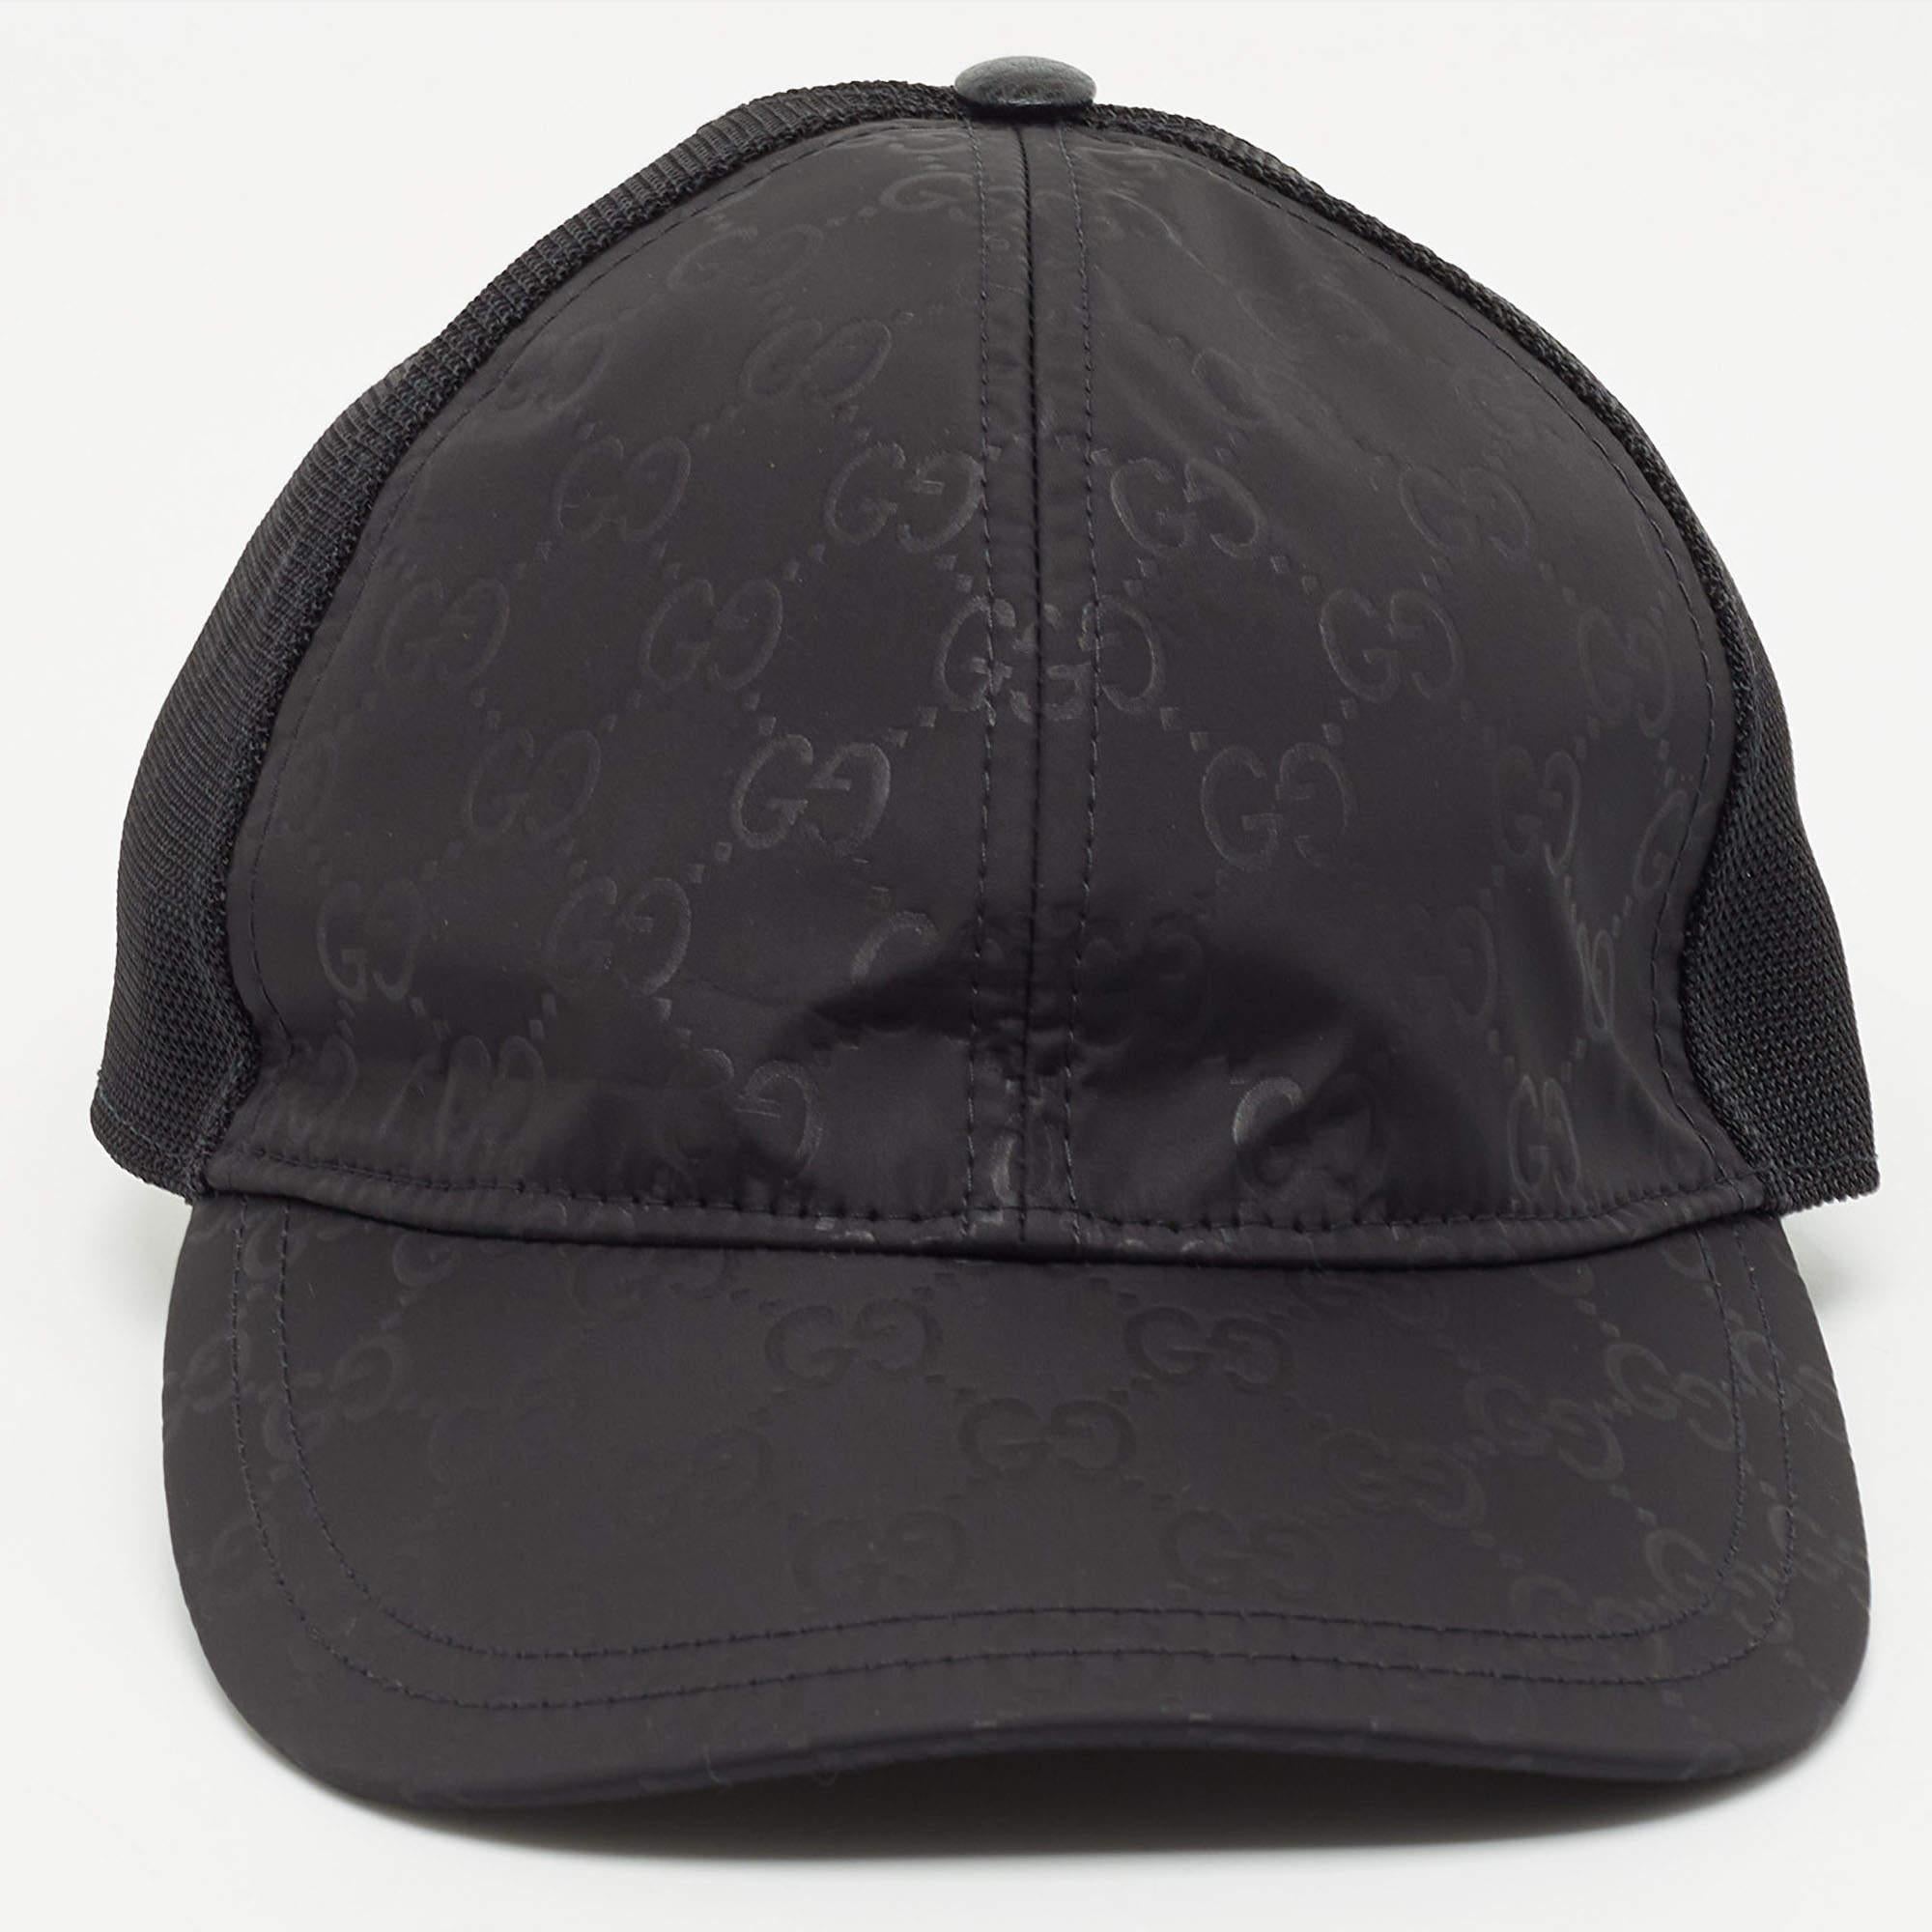 Embrace a casual day with luxurious fashion by adding this designer cap while you step out. Made from quality materials, it comes in a black shade.

Includes: Original Dustbag, Price Tag